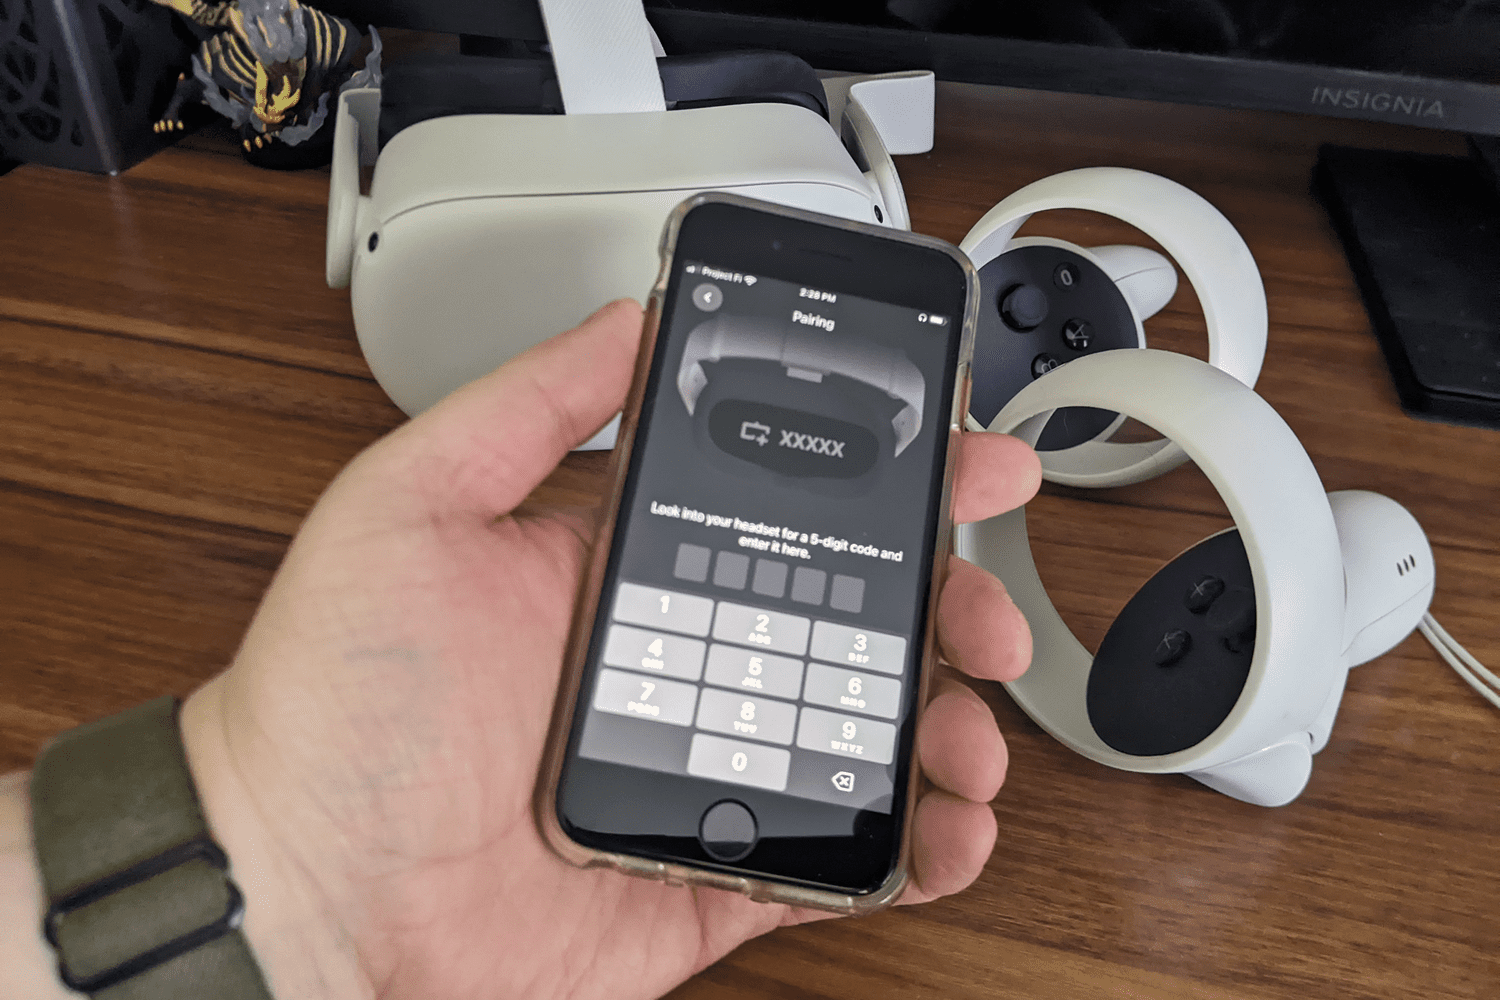 How to Pair Meta (Oculus) Quest 2 to a Phone